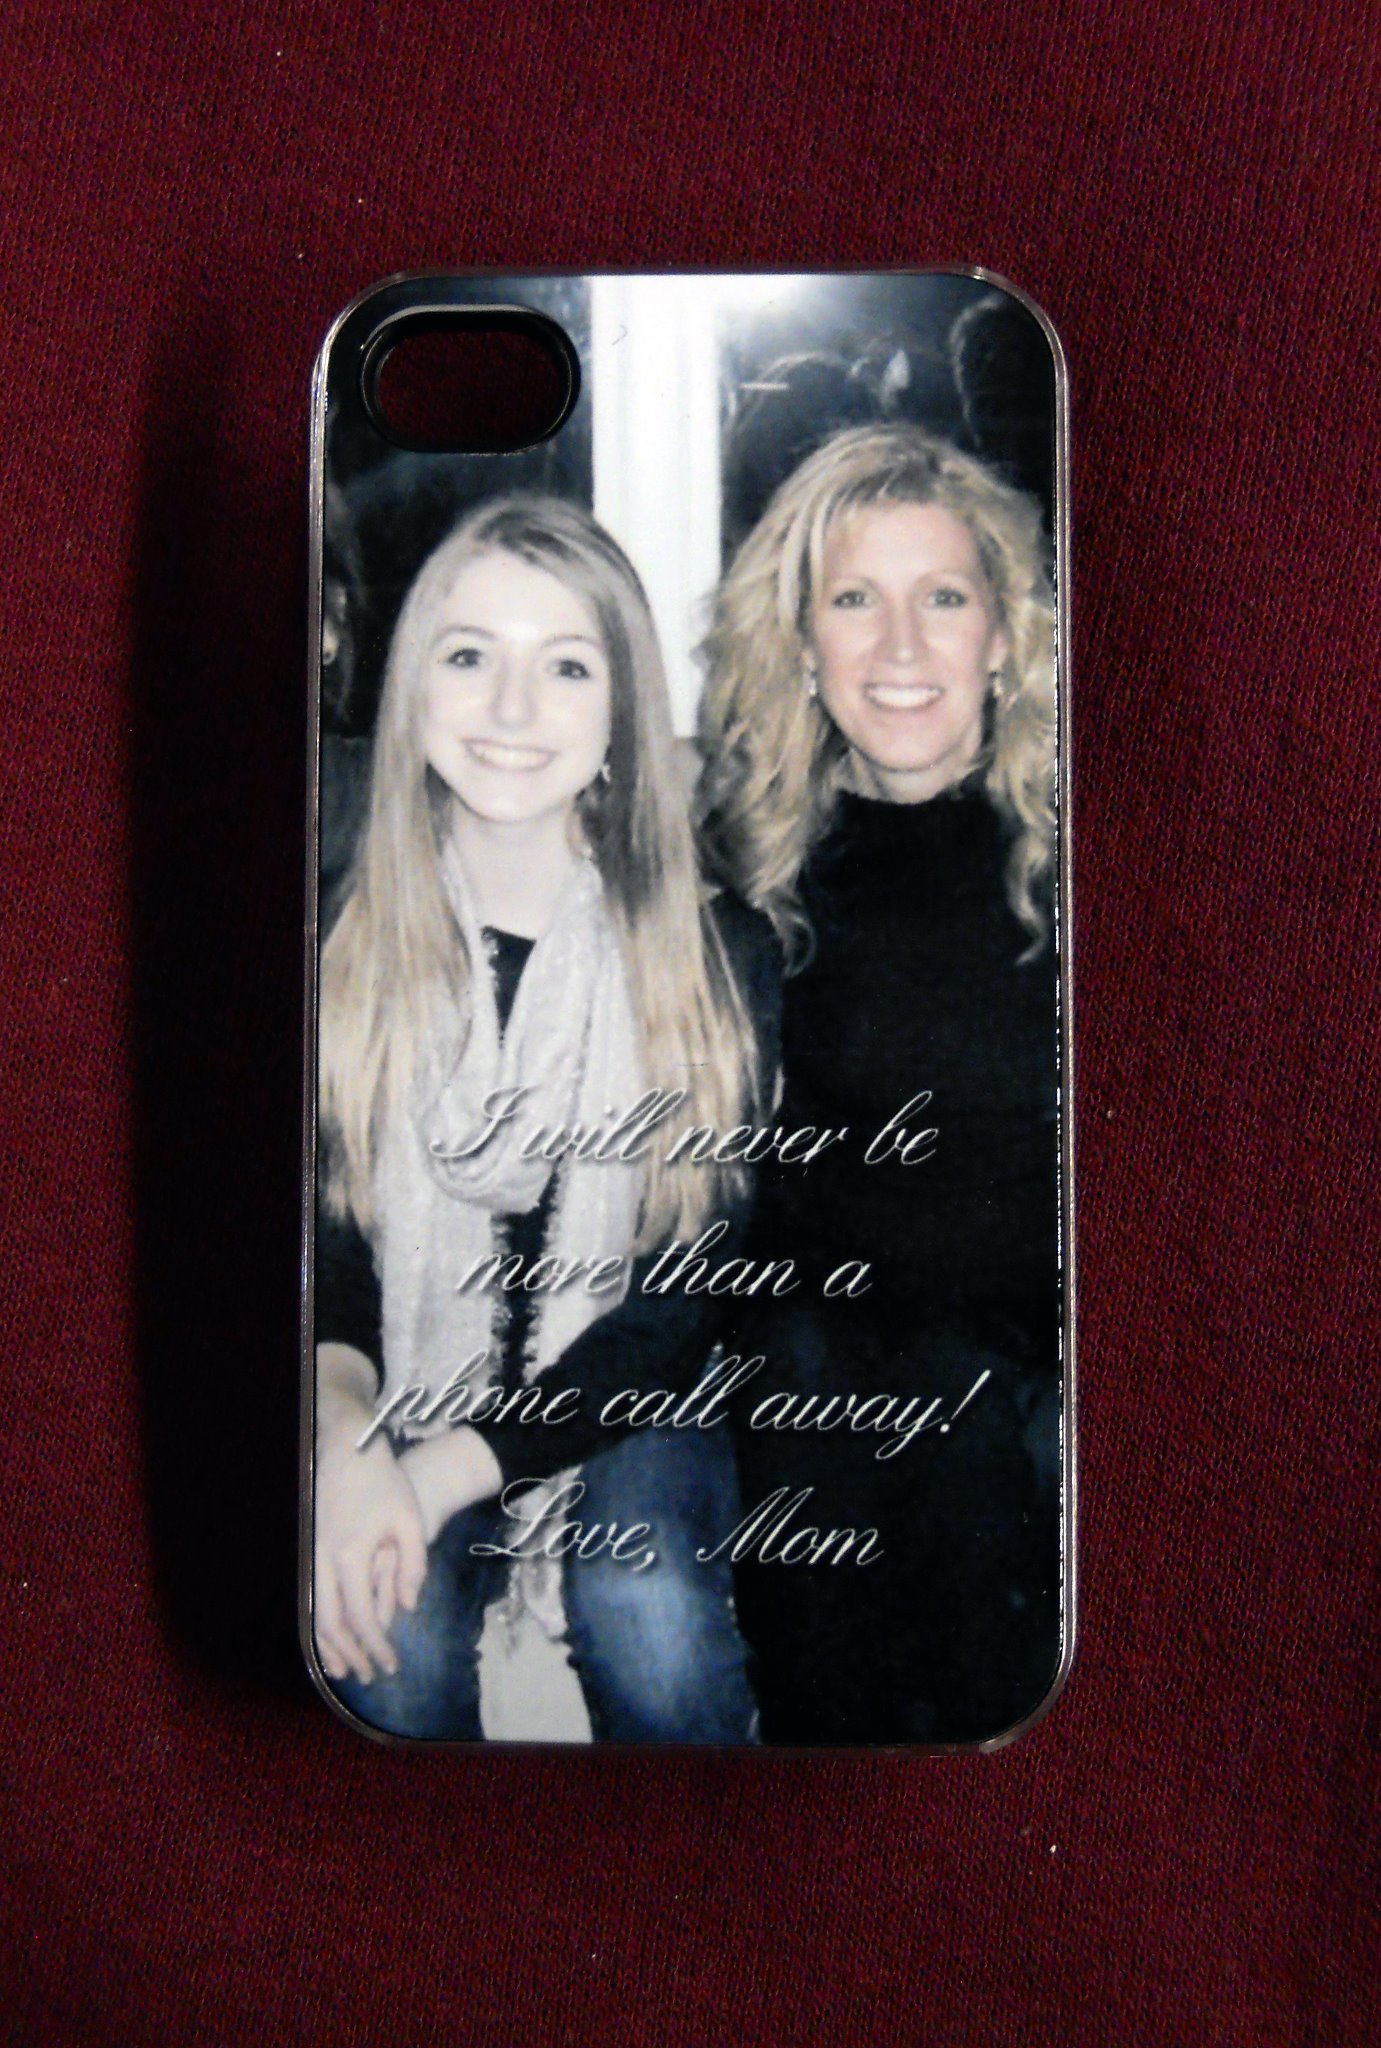 iphone 4 case made with sublimation printing